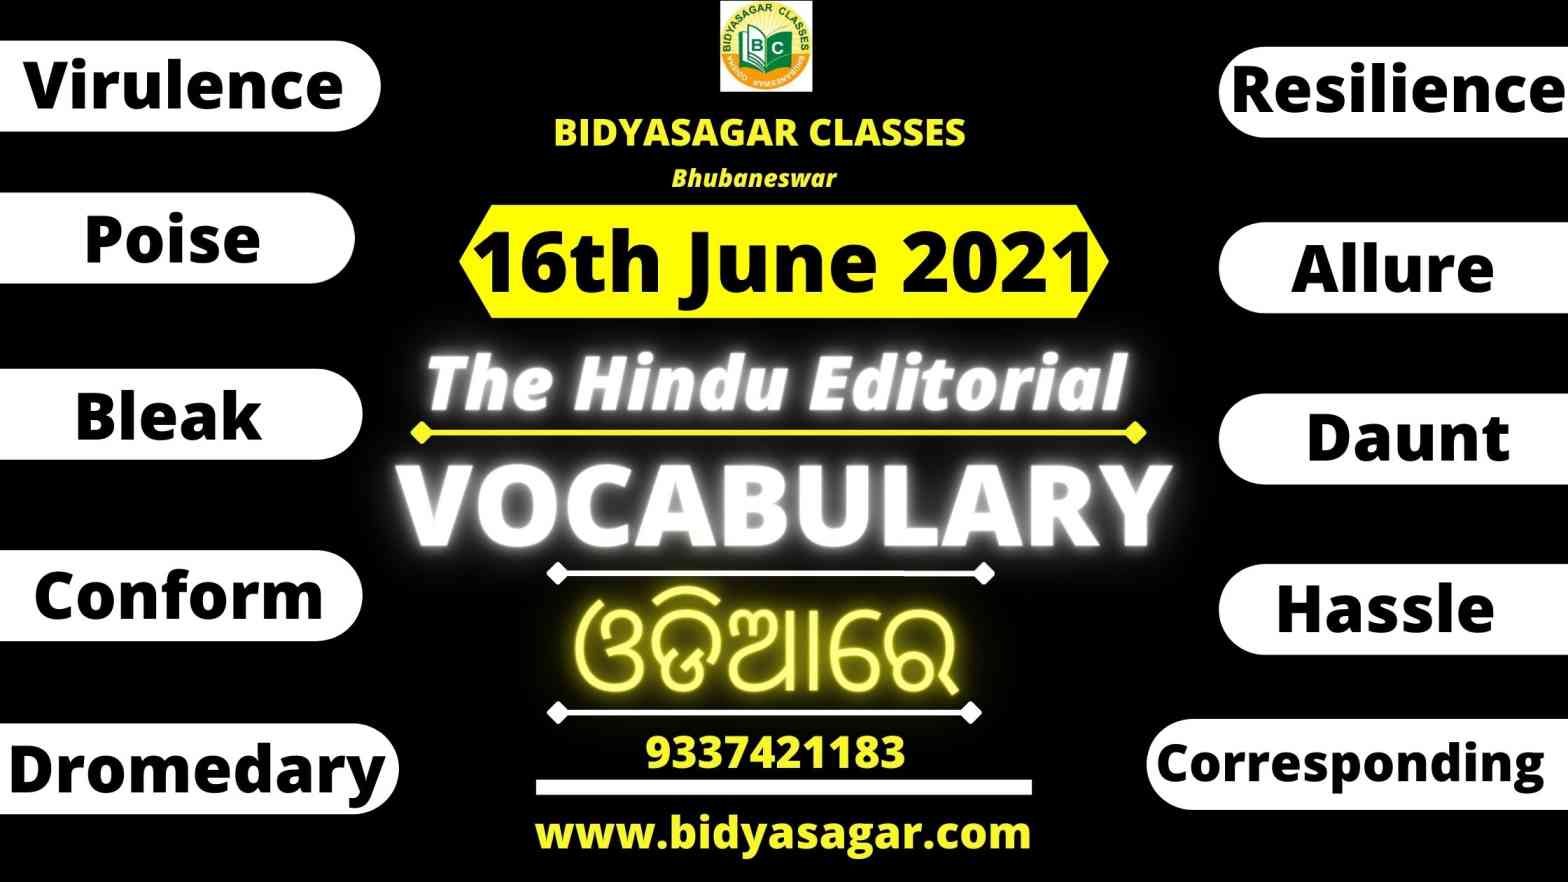 The Hindu Editorial Vocabulary of 16th June 2021